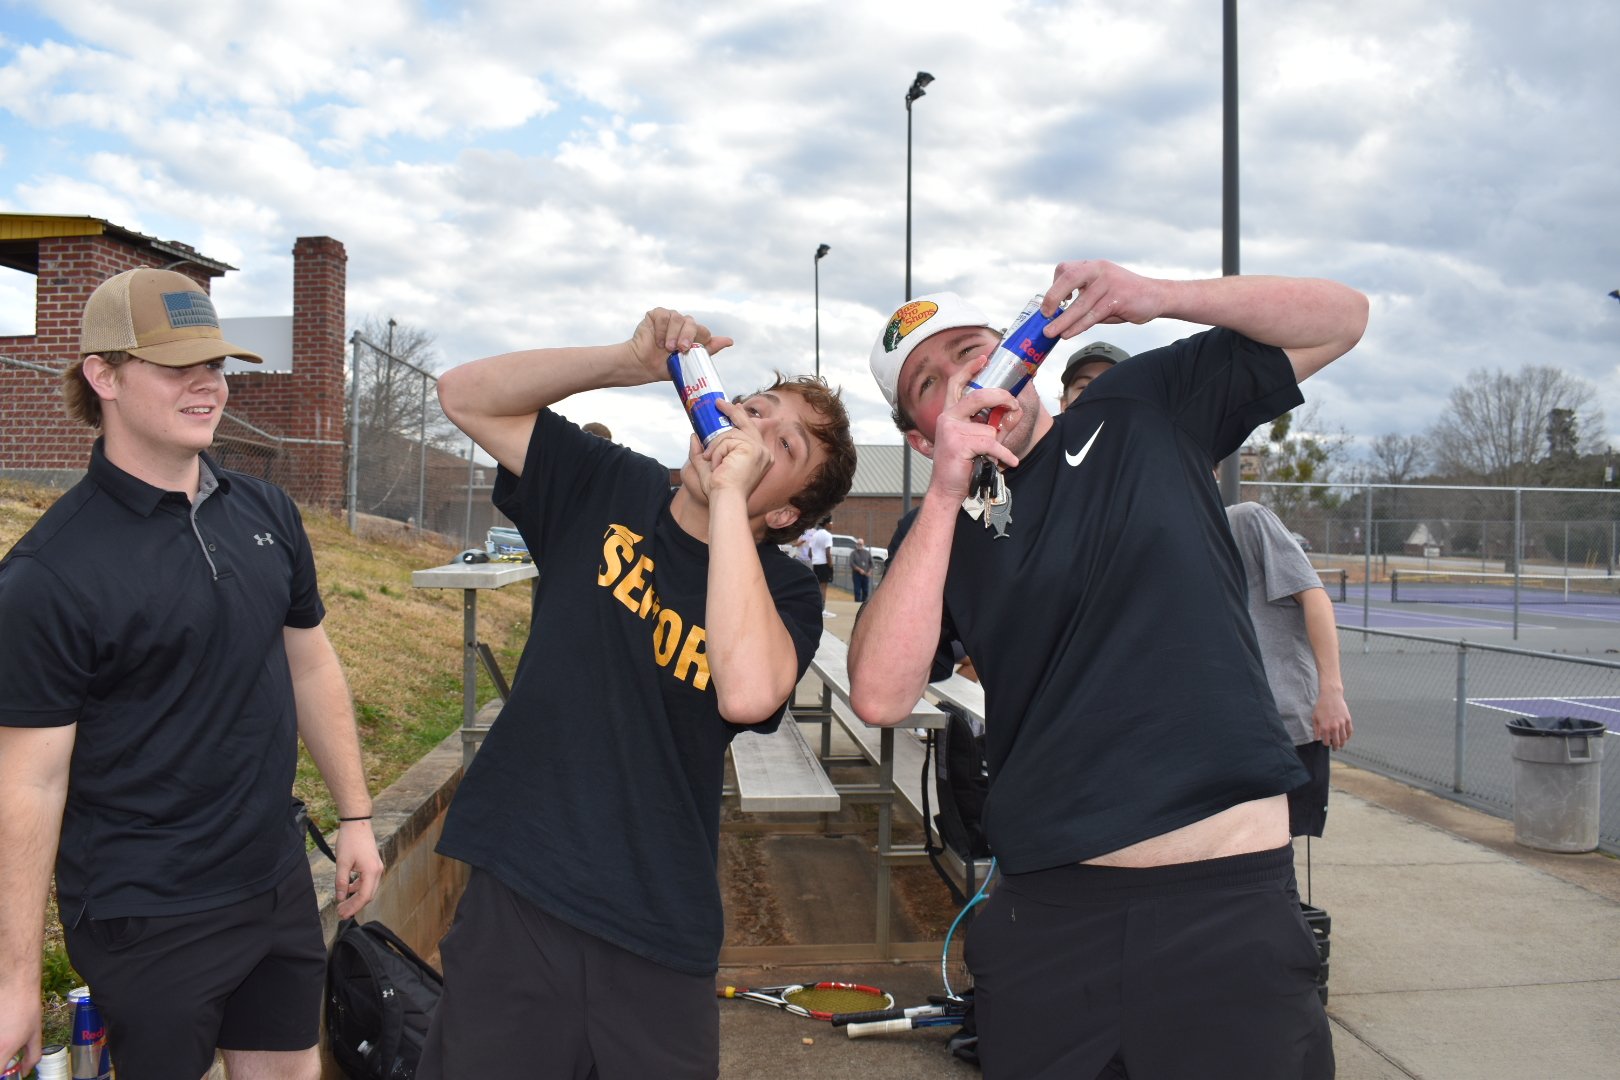  Members of the tennis team, Jackson Campbell (11) and Shawn Johnson (12), shotgun a Red Bull energy drink together before every match. 